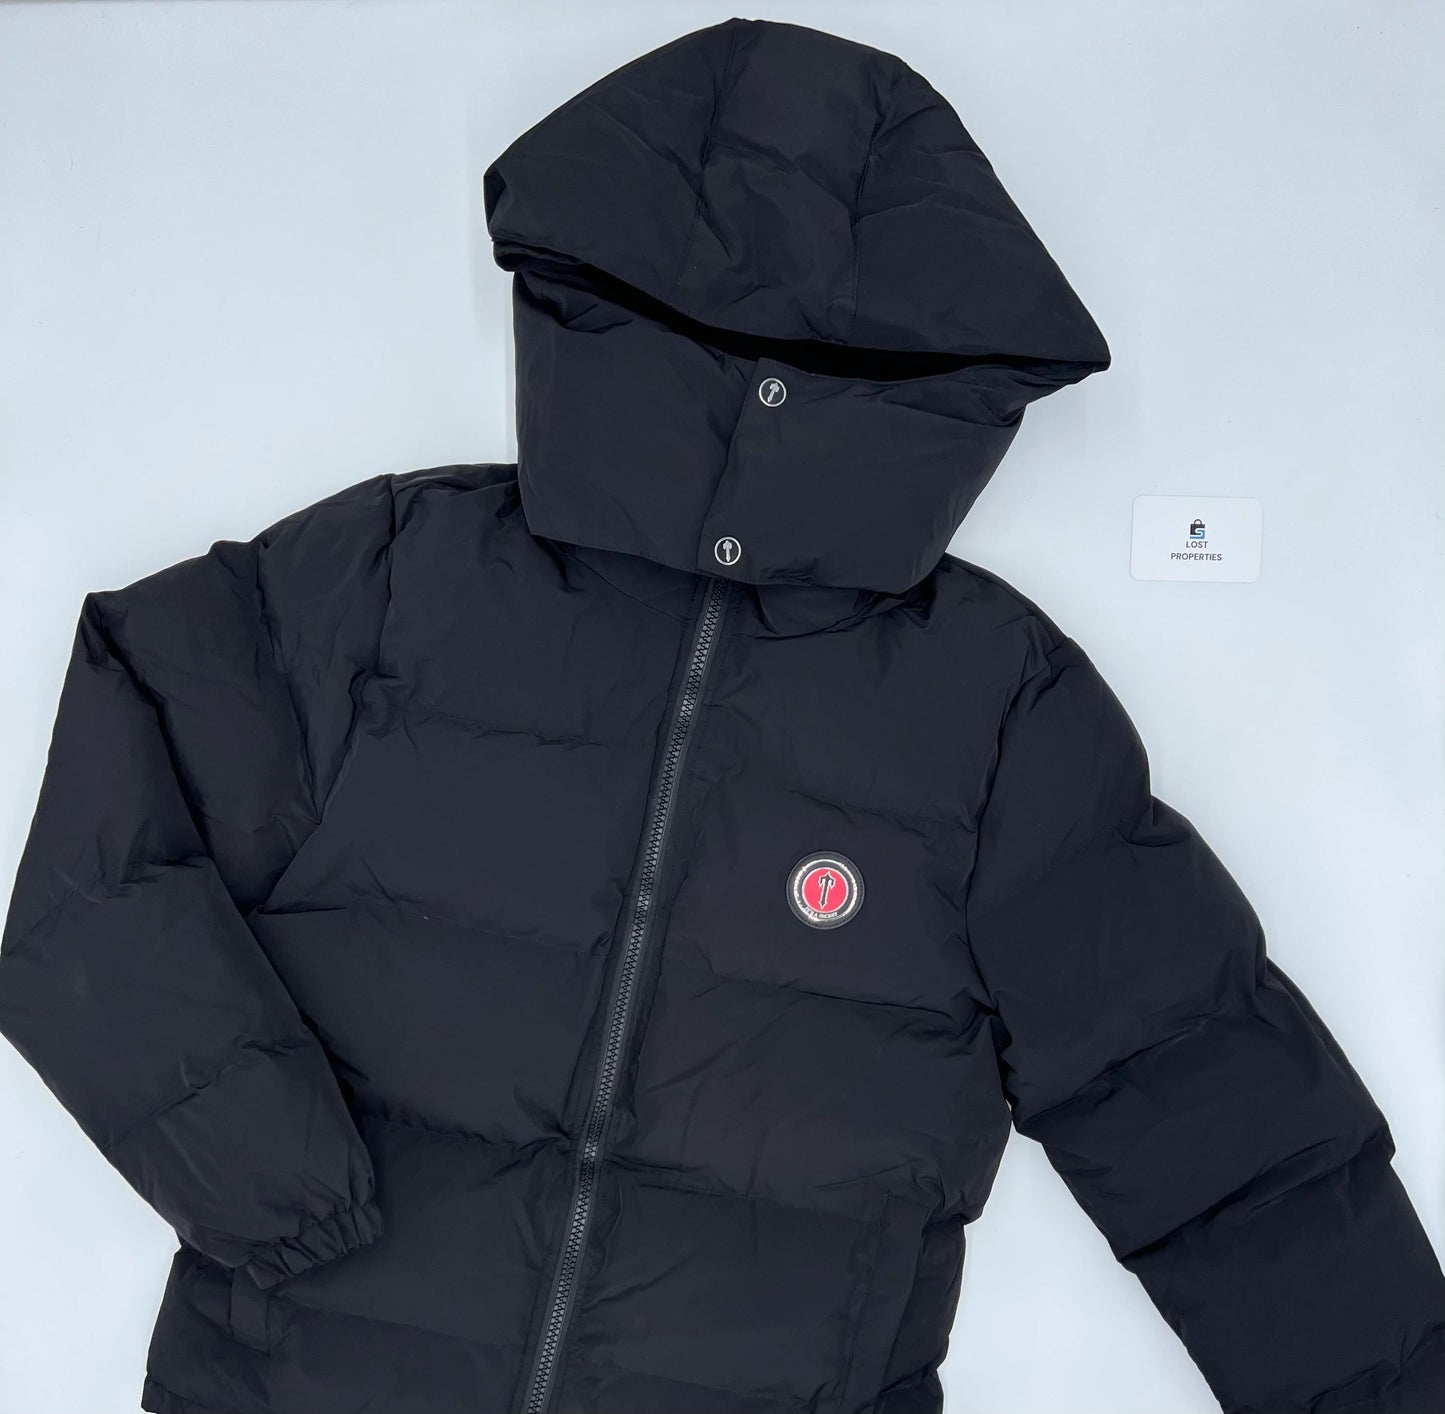 Trapstar Irongate Detachable Hooded Puffer Jacket - Black/Infrared